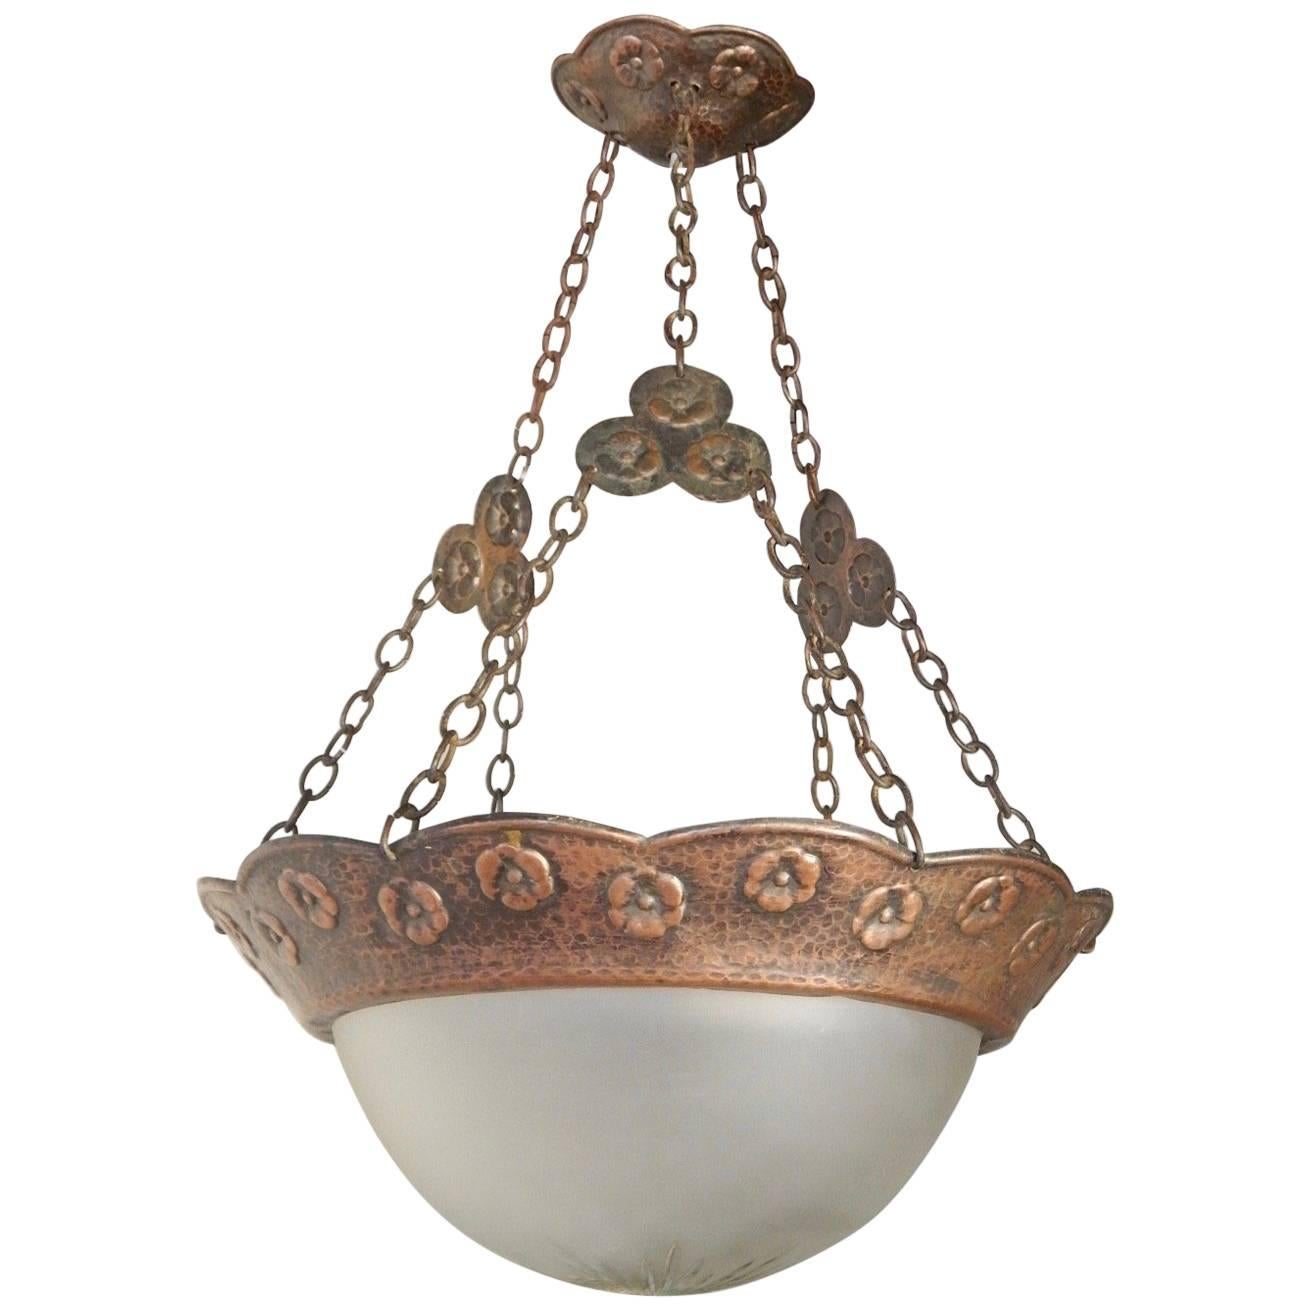 Swedish Arts & Crafts Hammered Copper Hanging Light Fixture, circa 1910 For Sale